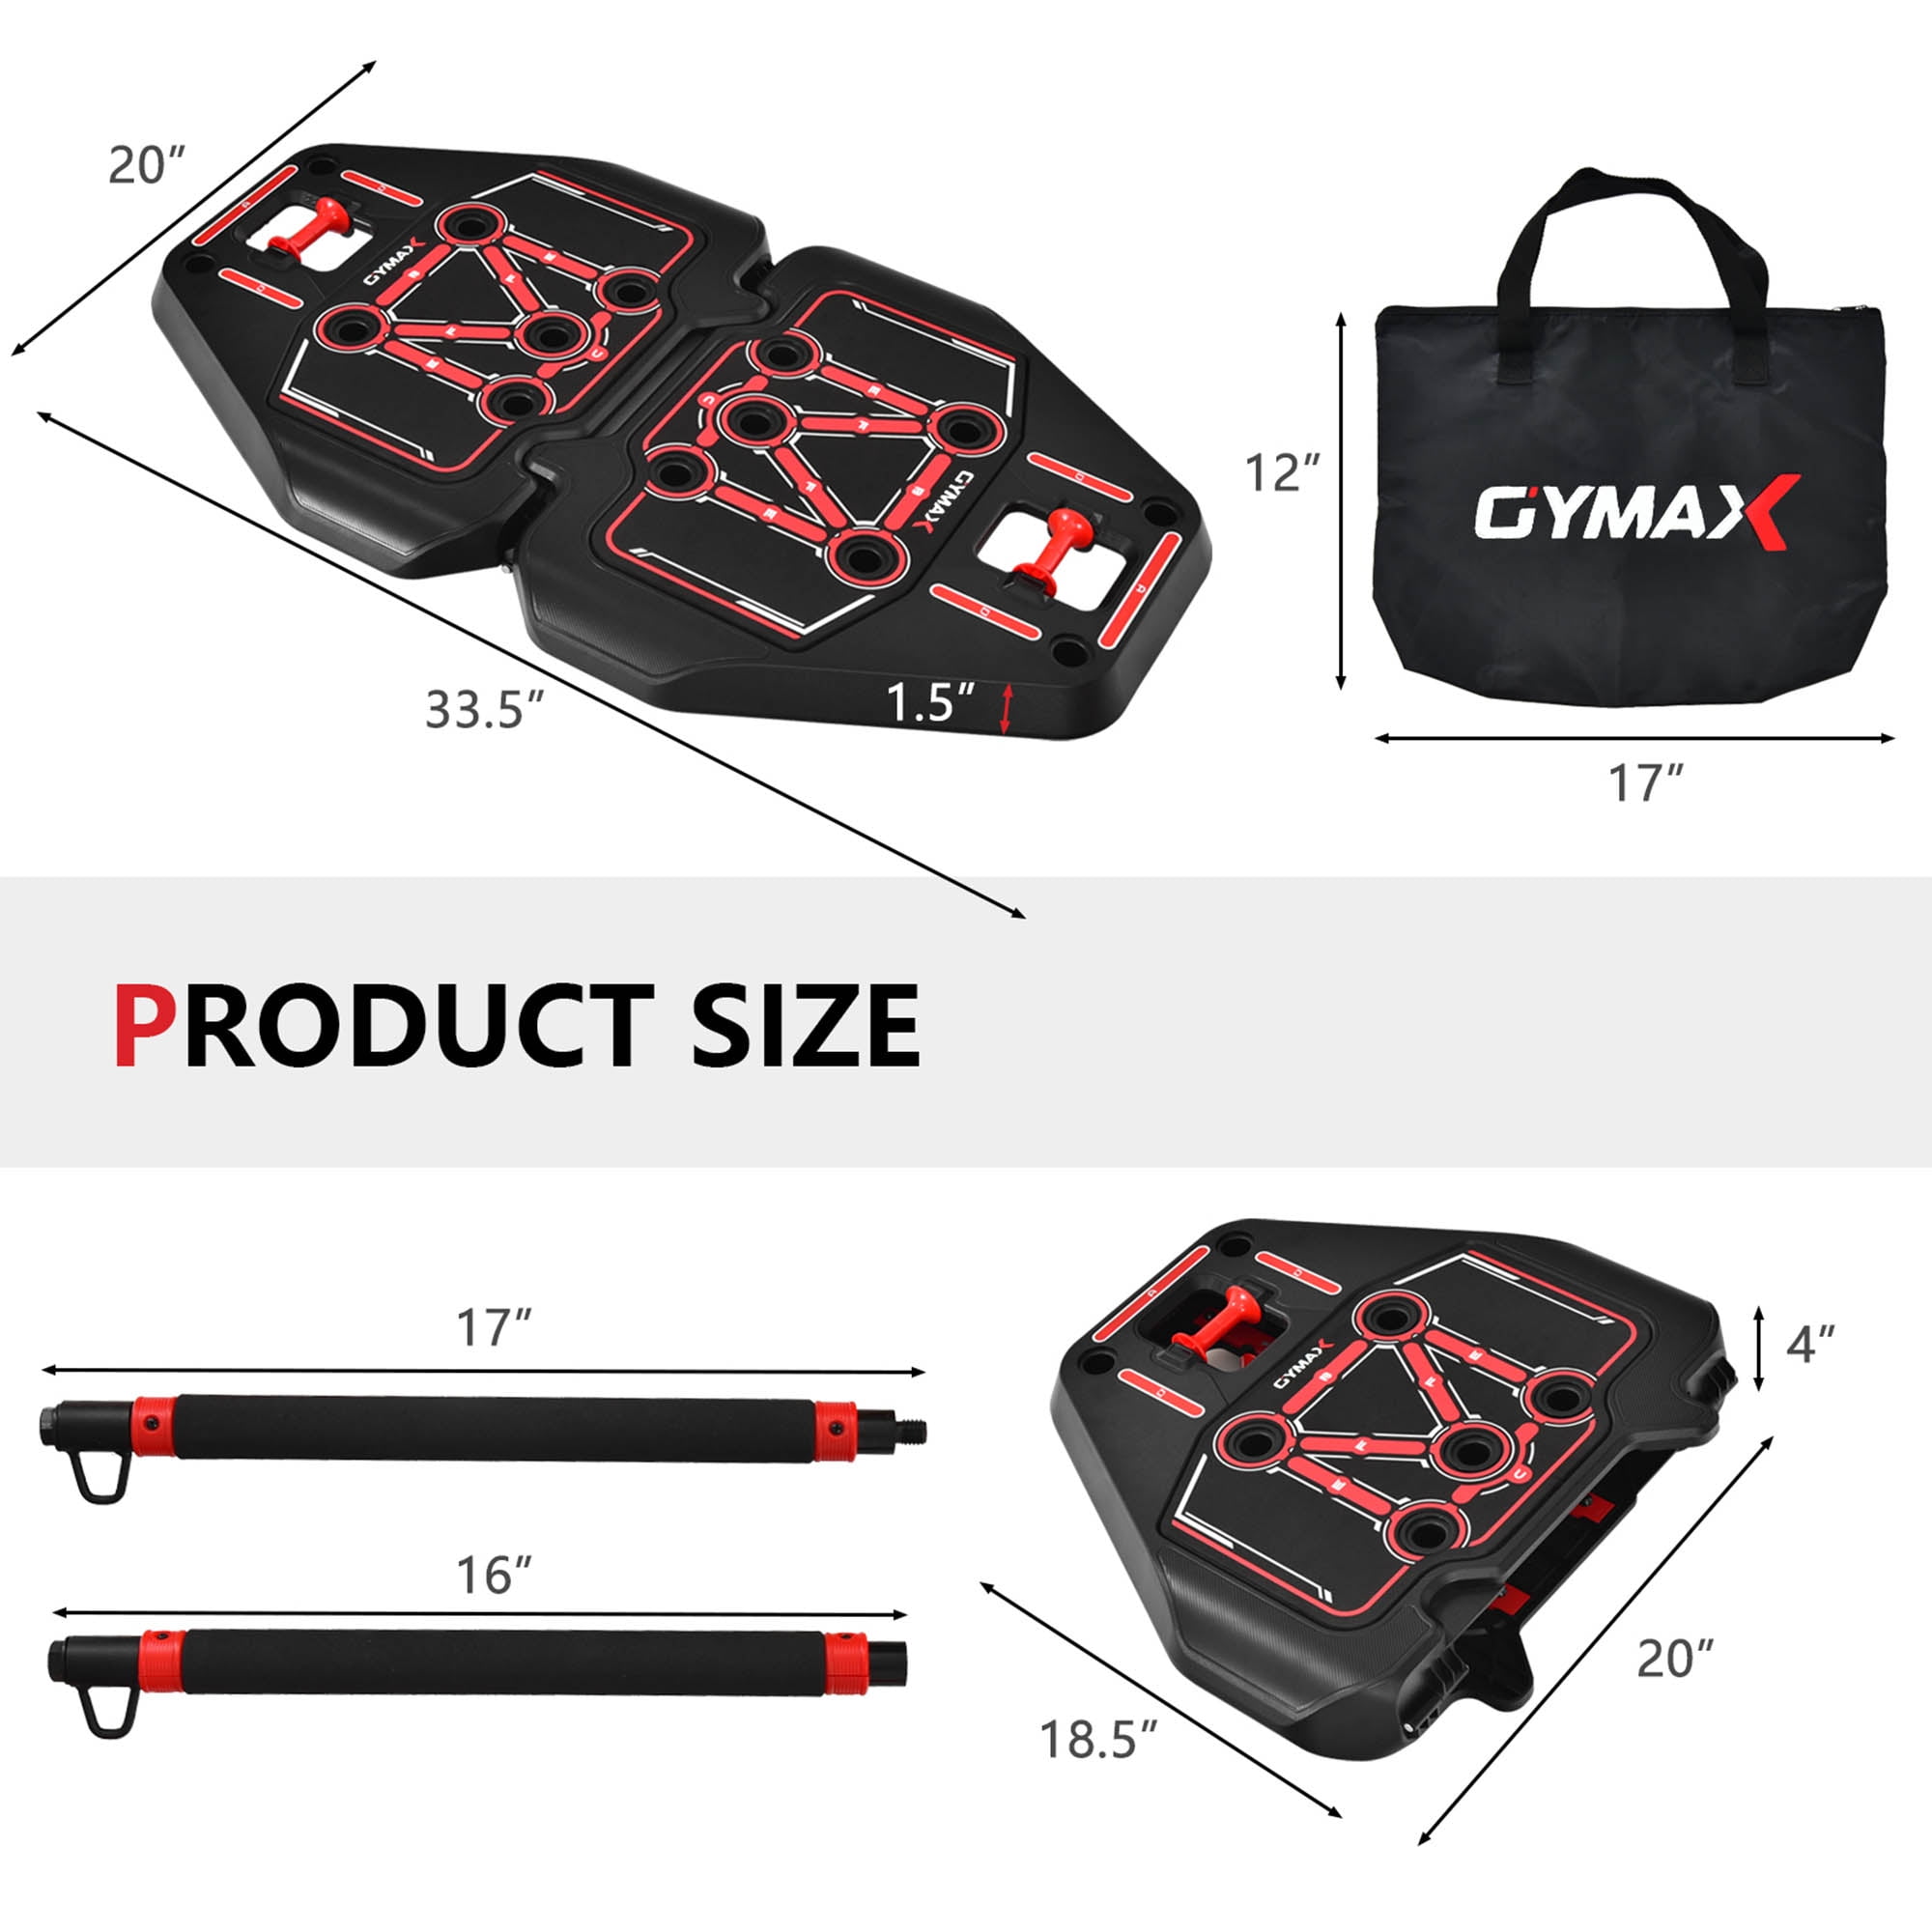 GYMAX Portable Home Gym, Full Body Workouts System w/ 14 Exercise  Accessories, Foldable Fitness Board, Resistance Bands, Ab Roller Wheel,  Push-up